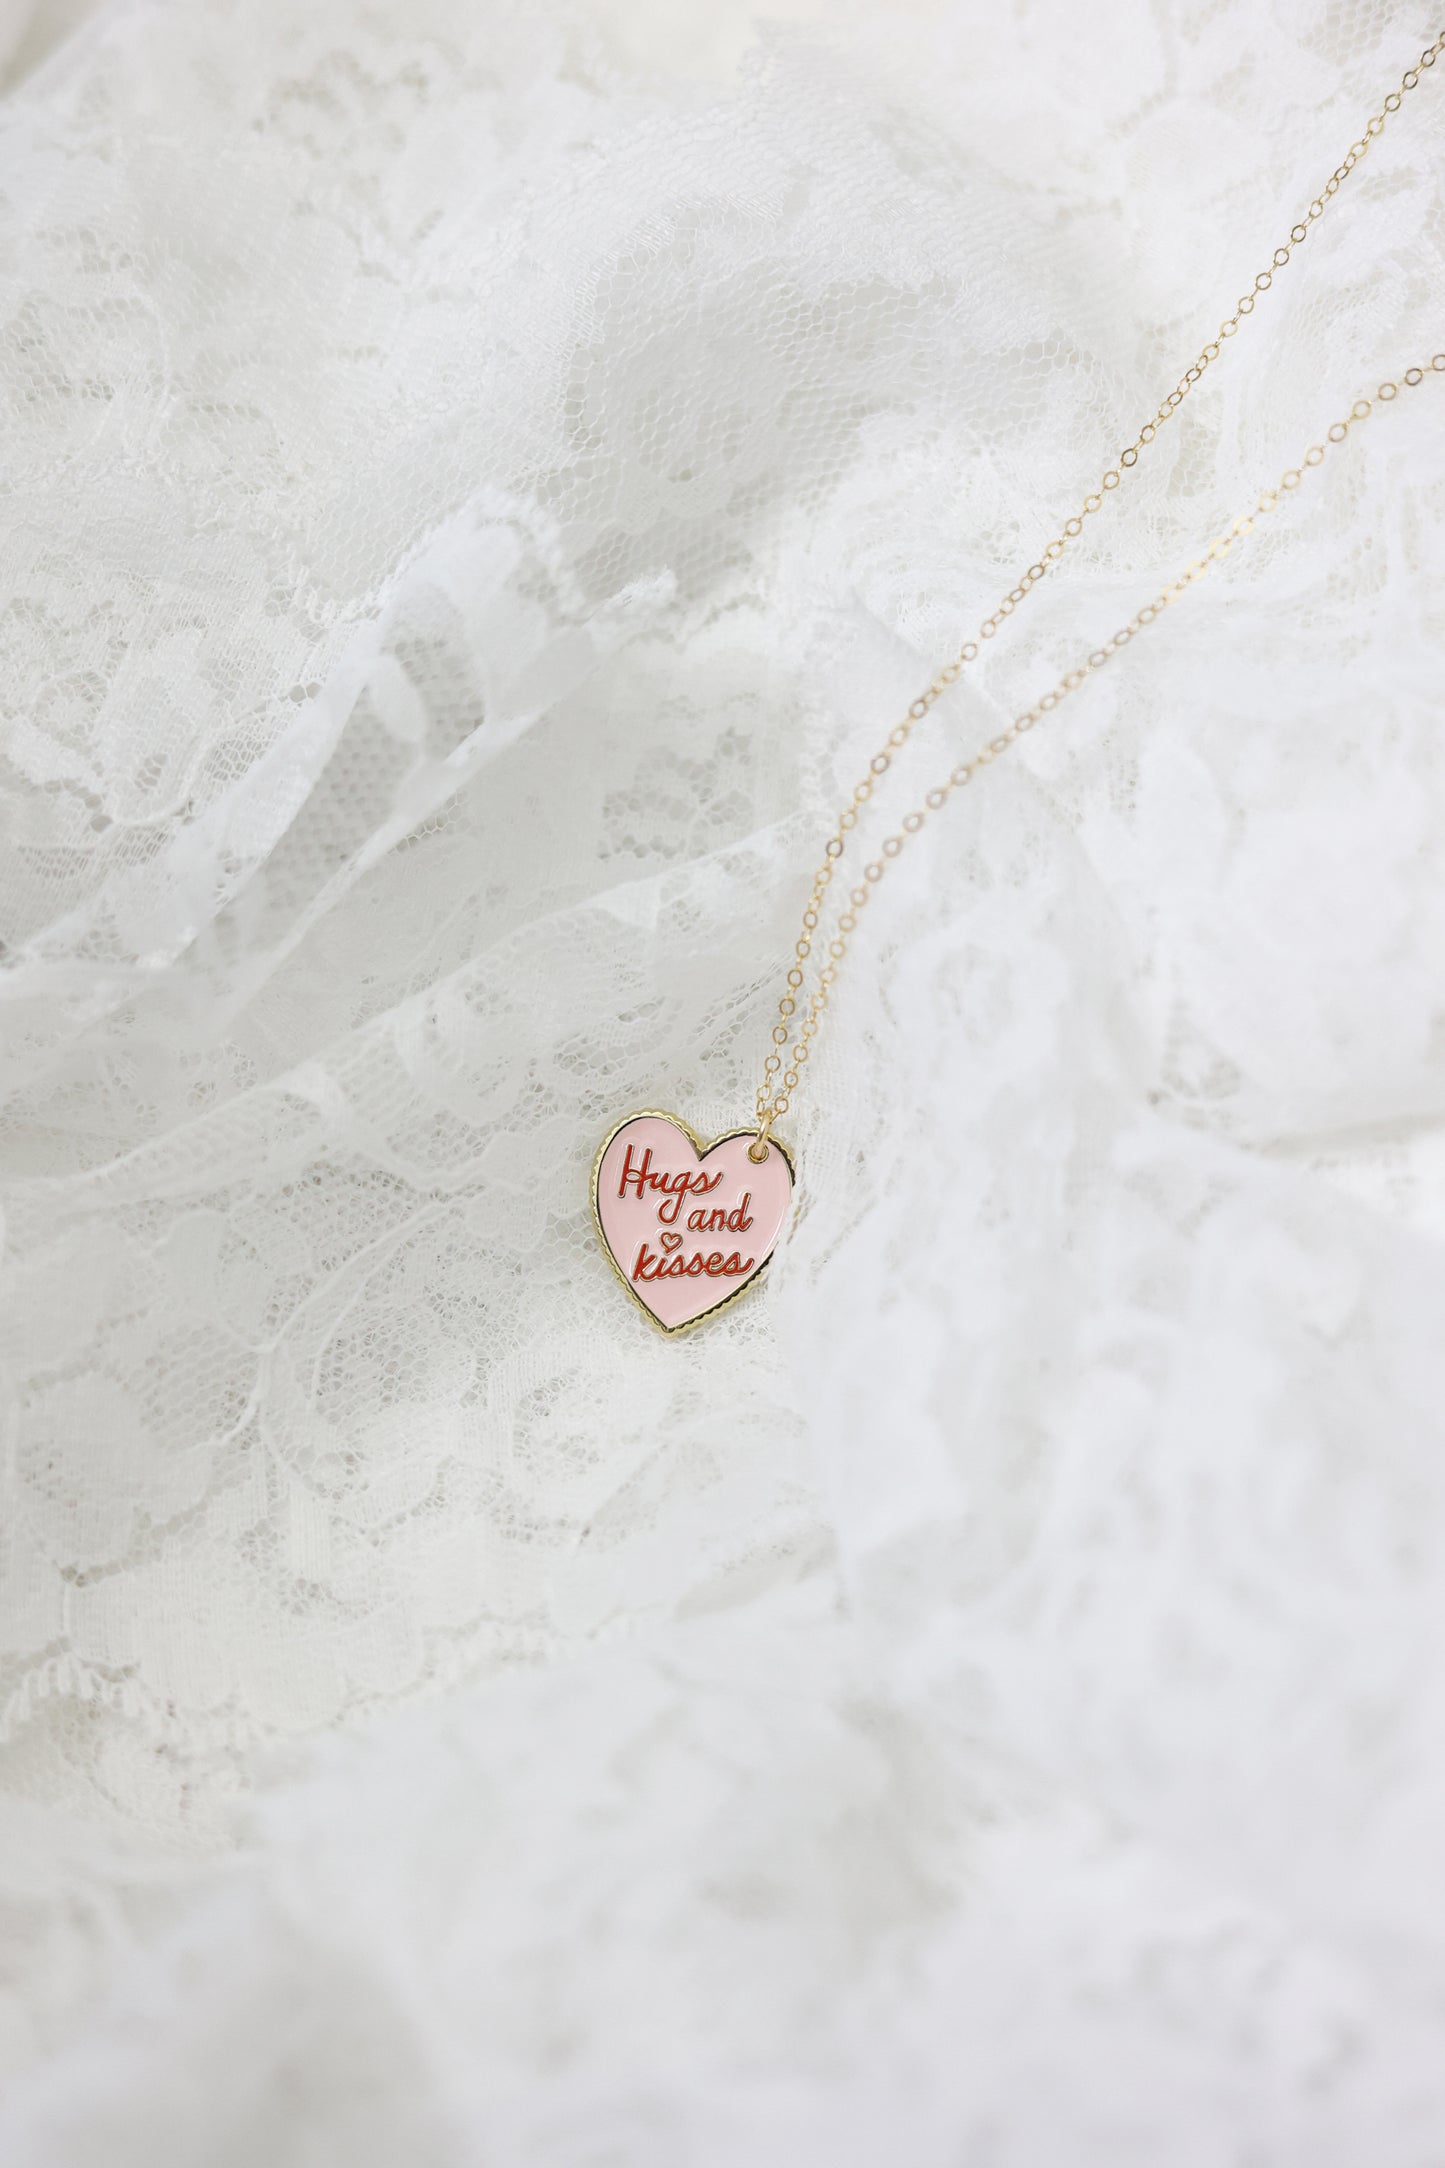 Pixie Dust Collection - Hugs and Kisses Necklace